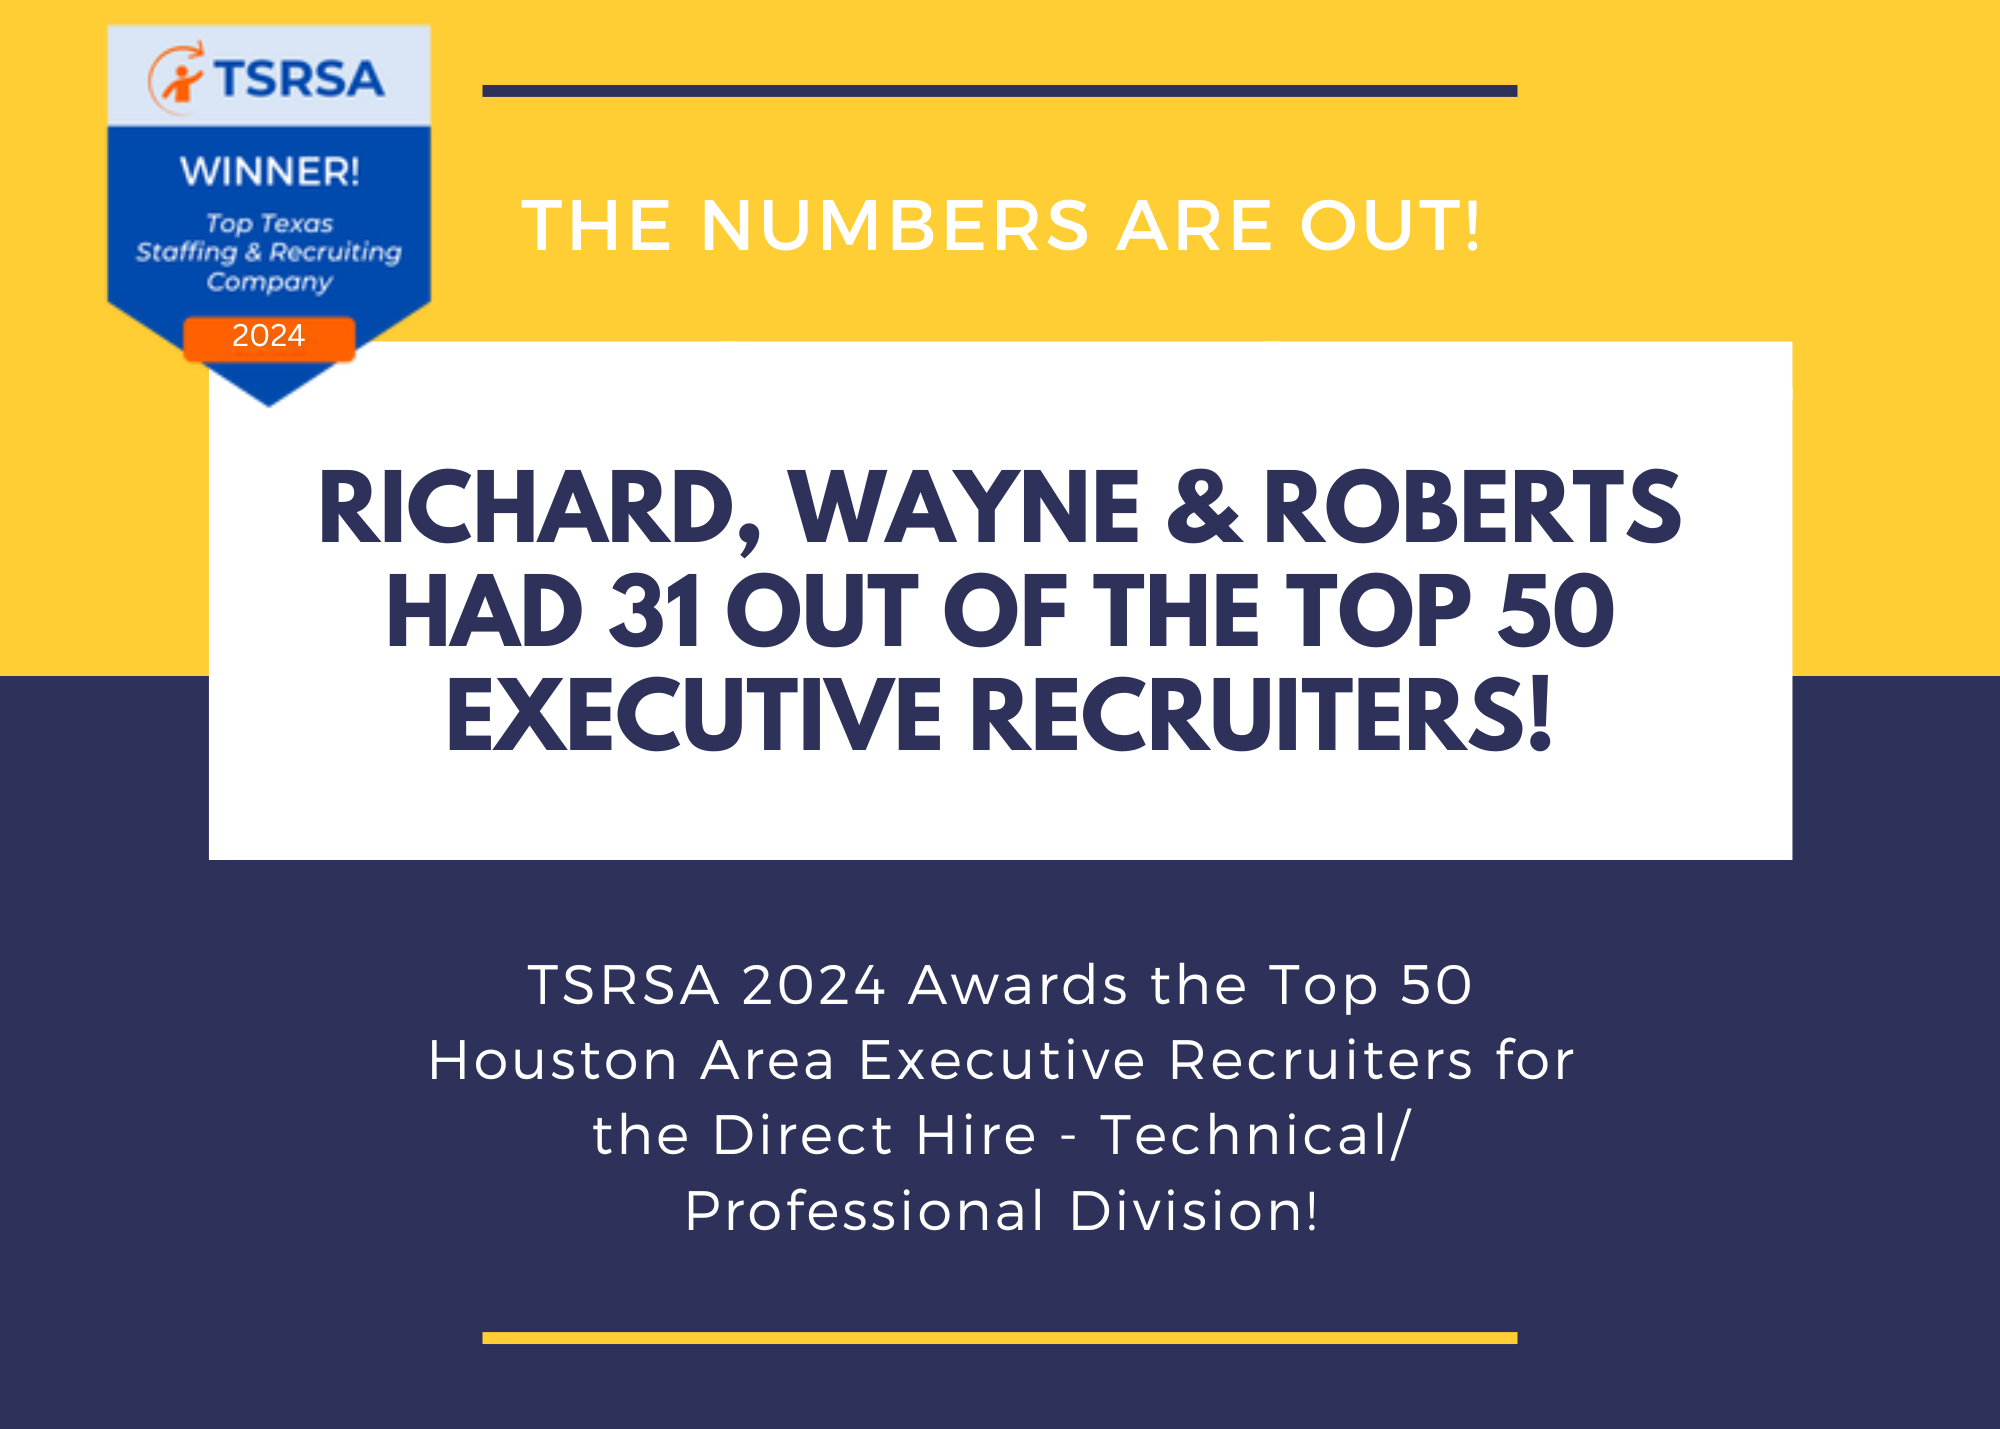 41st Annual Texas Search, Recruiting & Staffing Association (formerly HAAPC) Award Winners for 2024